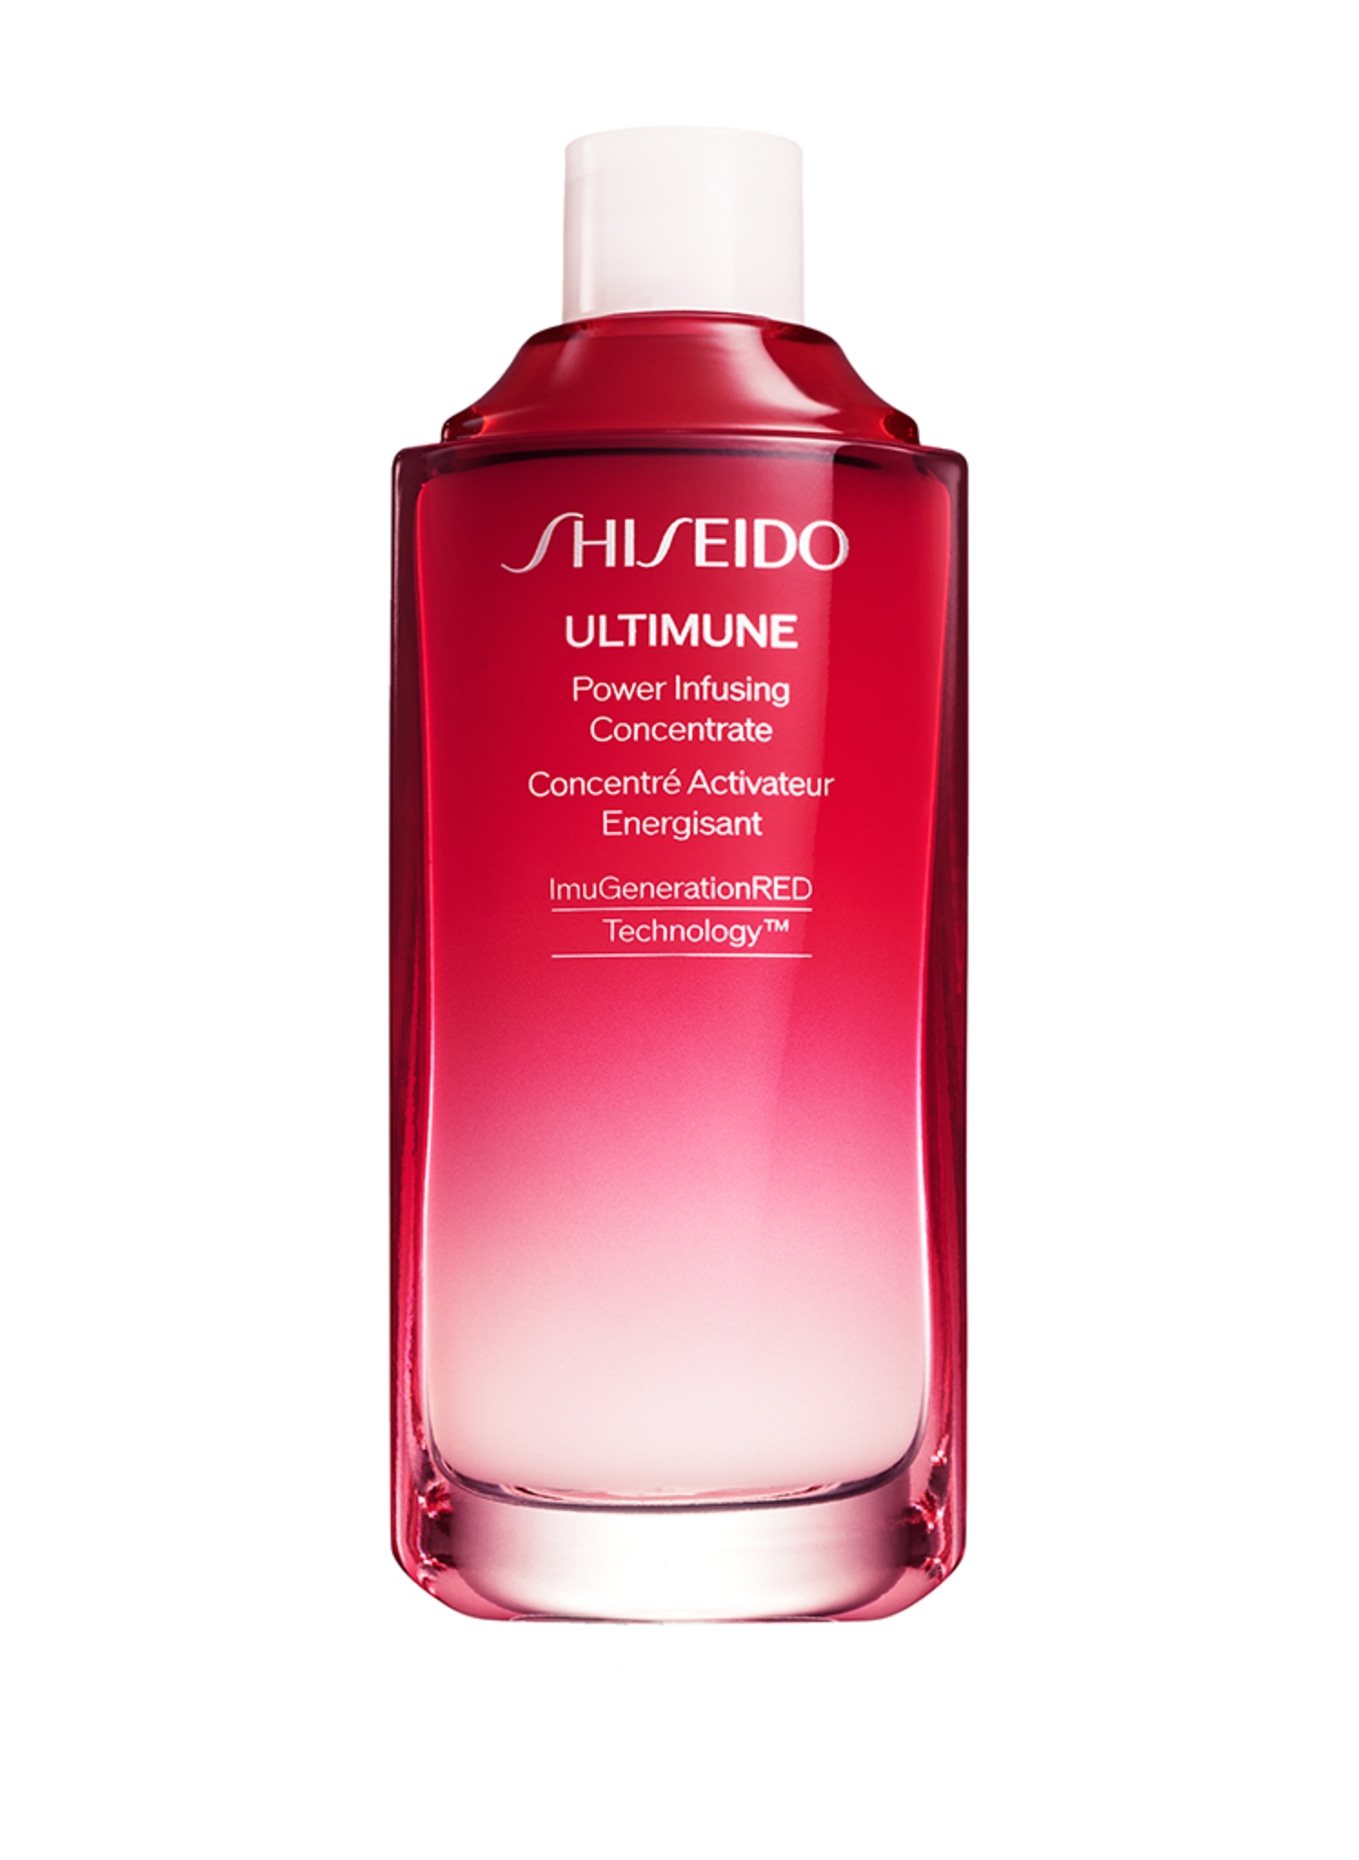 SHISEIDO ULTIMUNE POWER INFUSING CONCENTRATE REFILL (Obrázek 1)